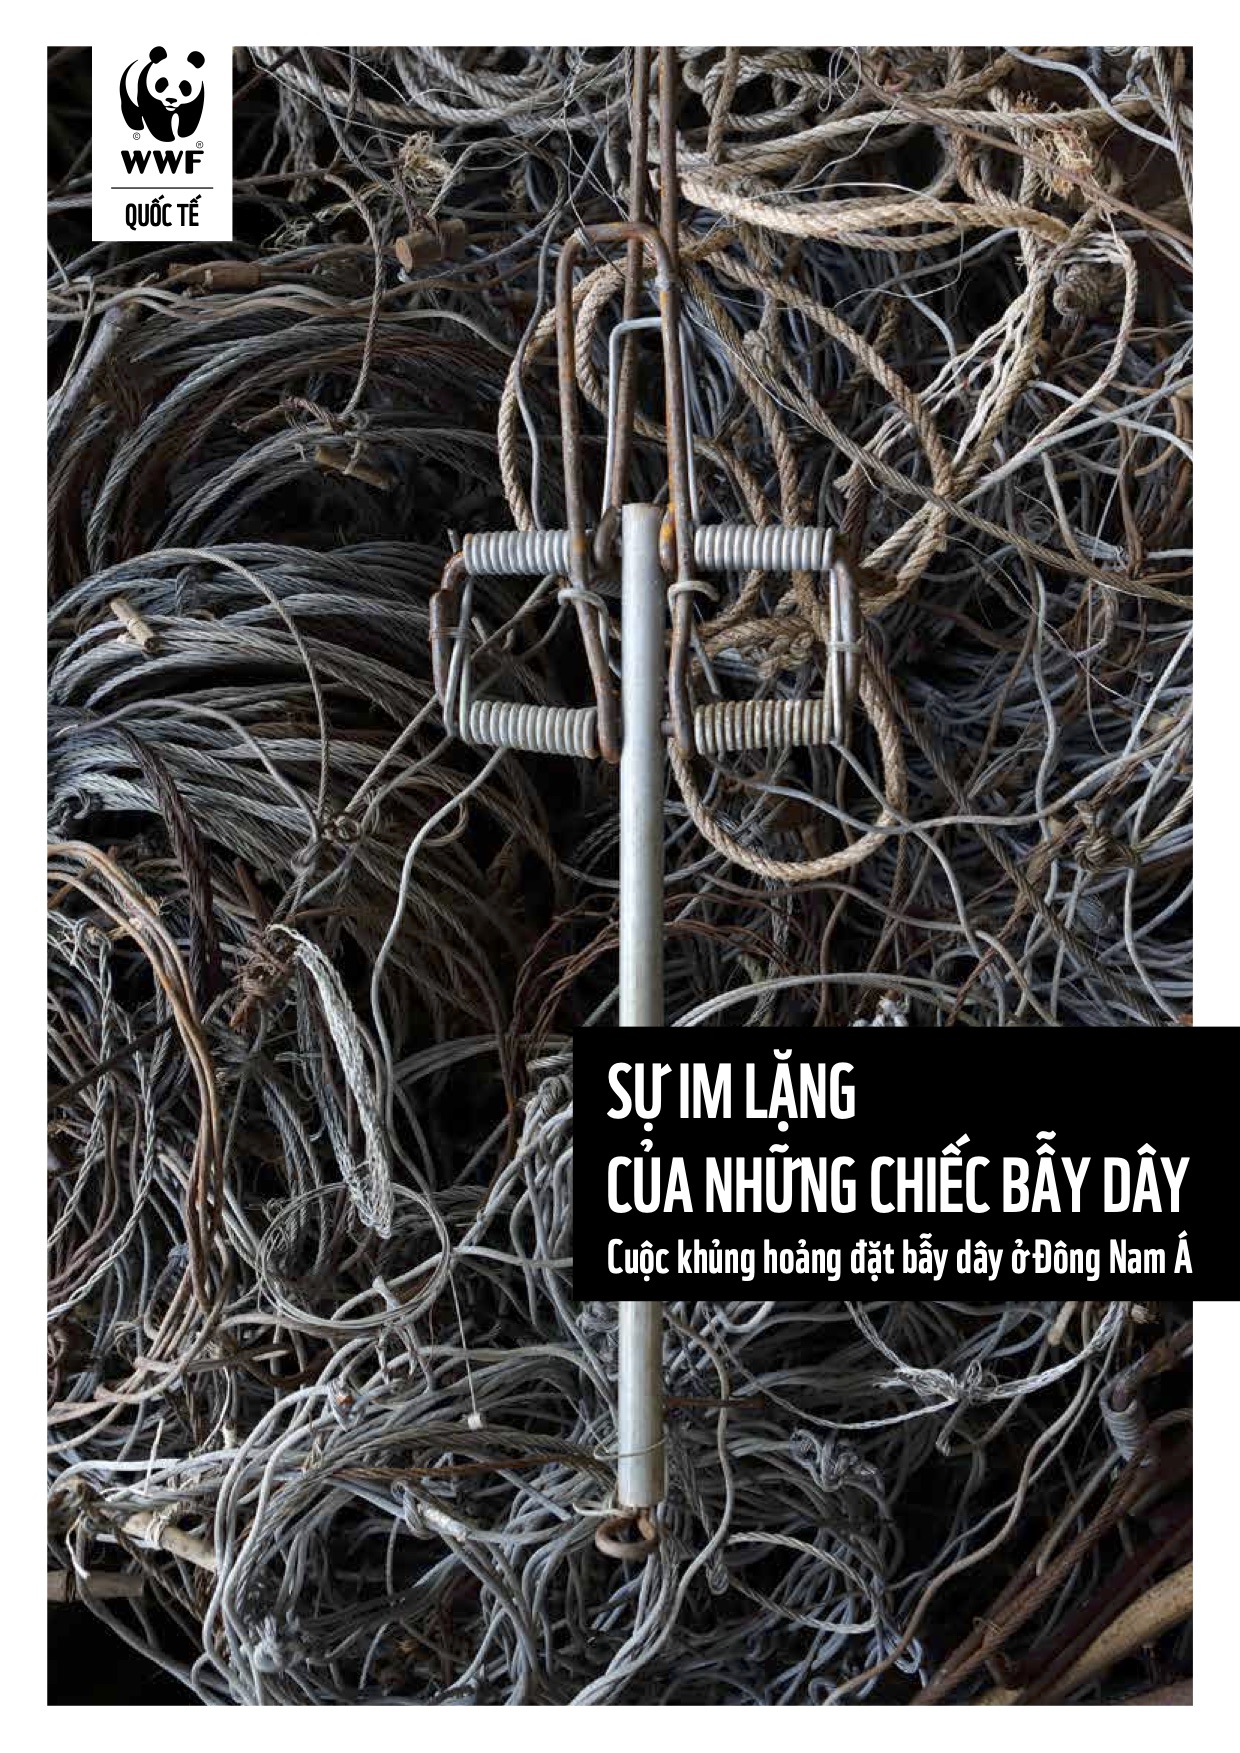 Proofreading – Silence of the Snares – WWF-Viet Nam